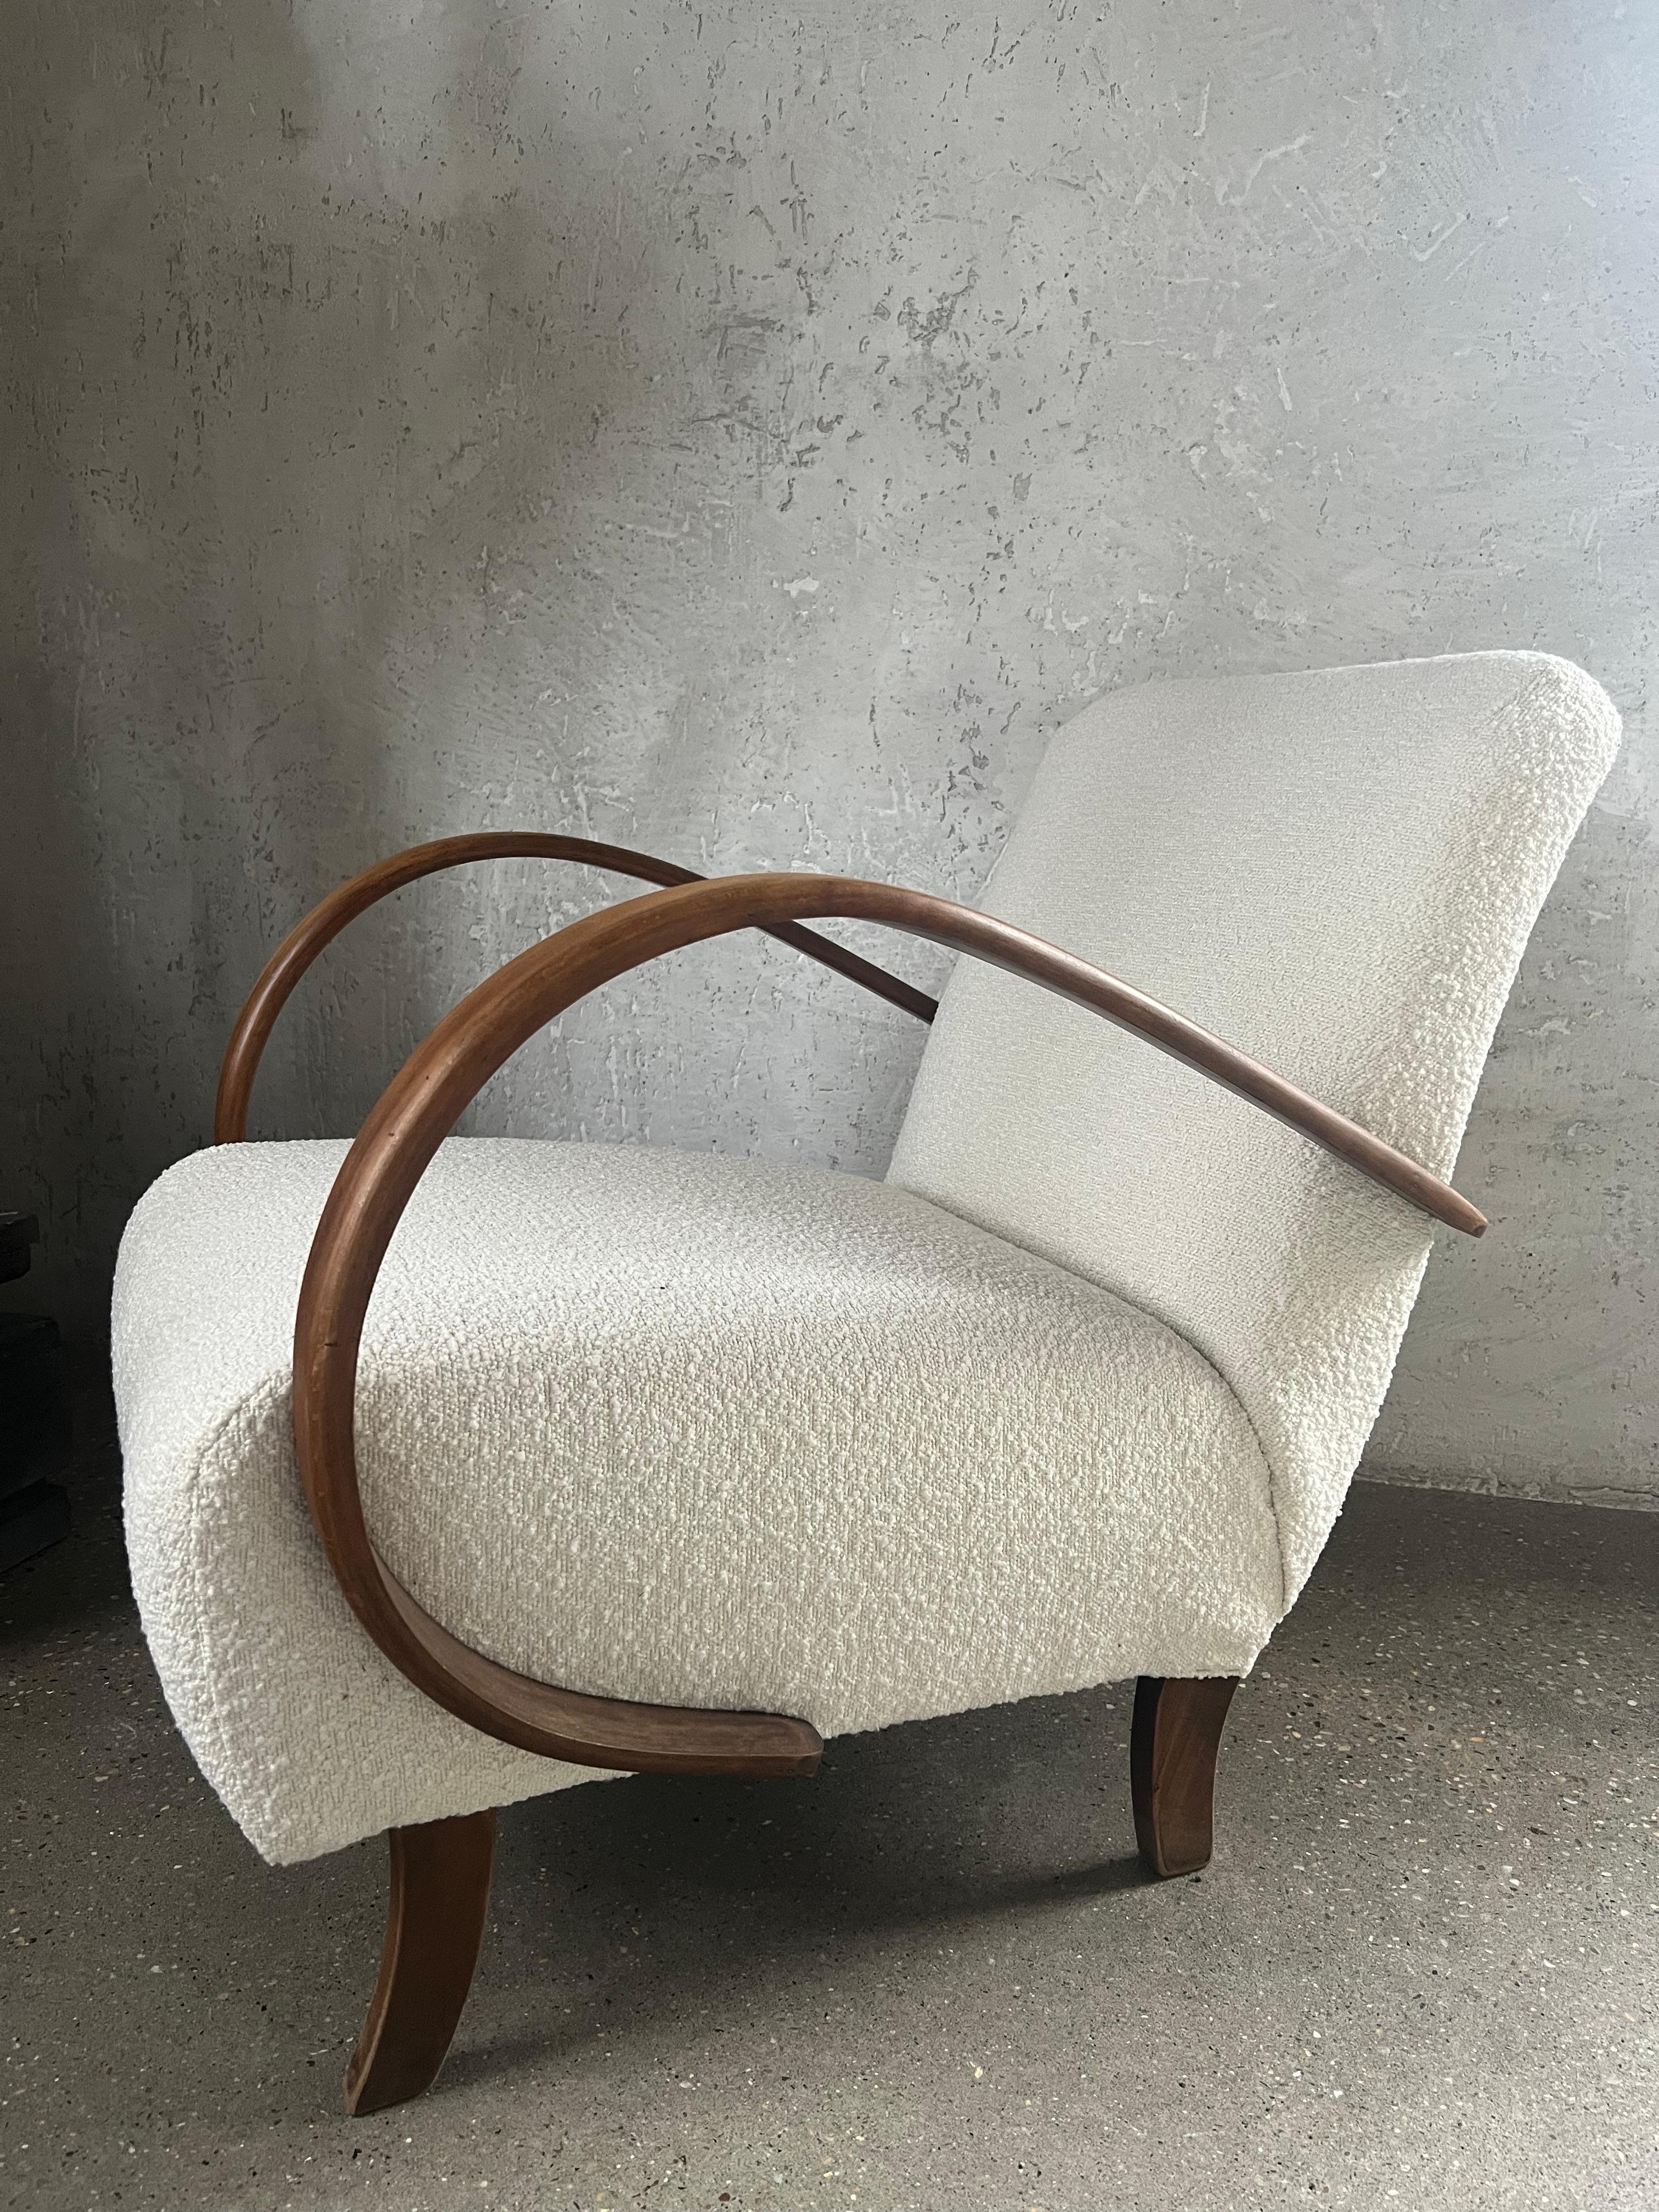 A Halabala chair refers to a chair designed by Jindřich Halabala, a prominent Czech furniture designer active primarily during the interwar period, particularly in the 1930s. Halabala's designs are known for their modernist and functionalist